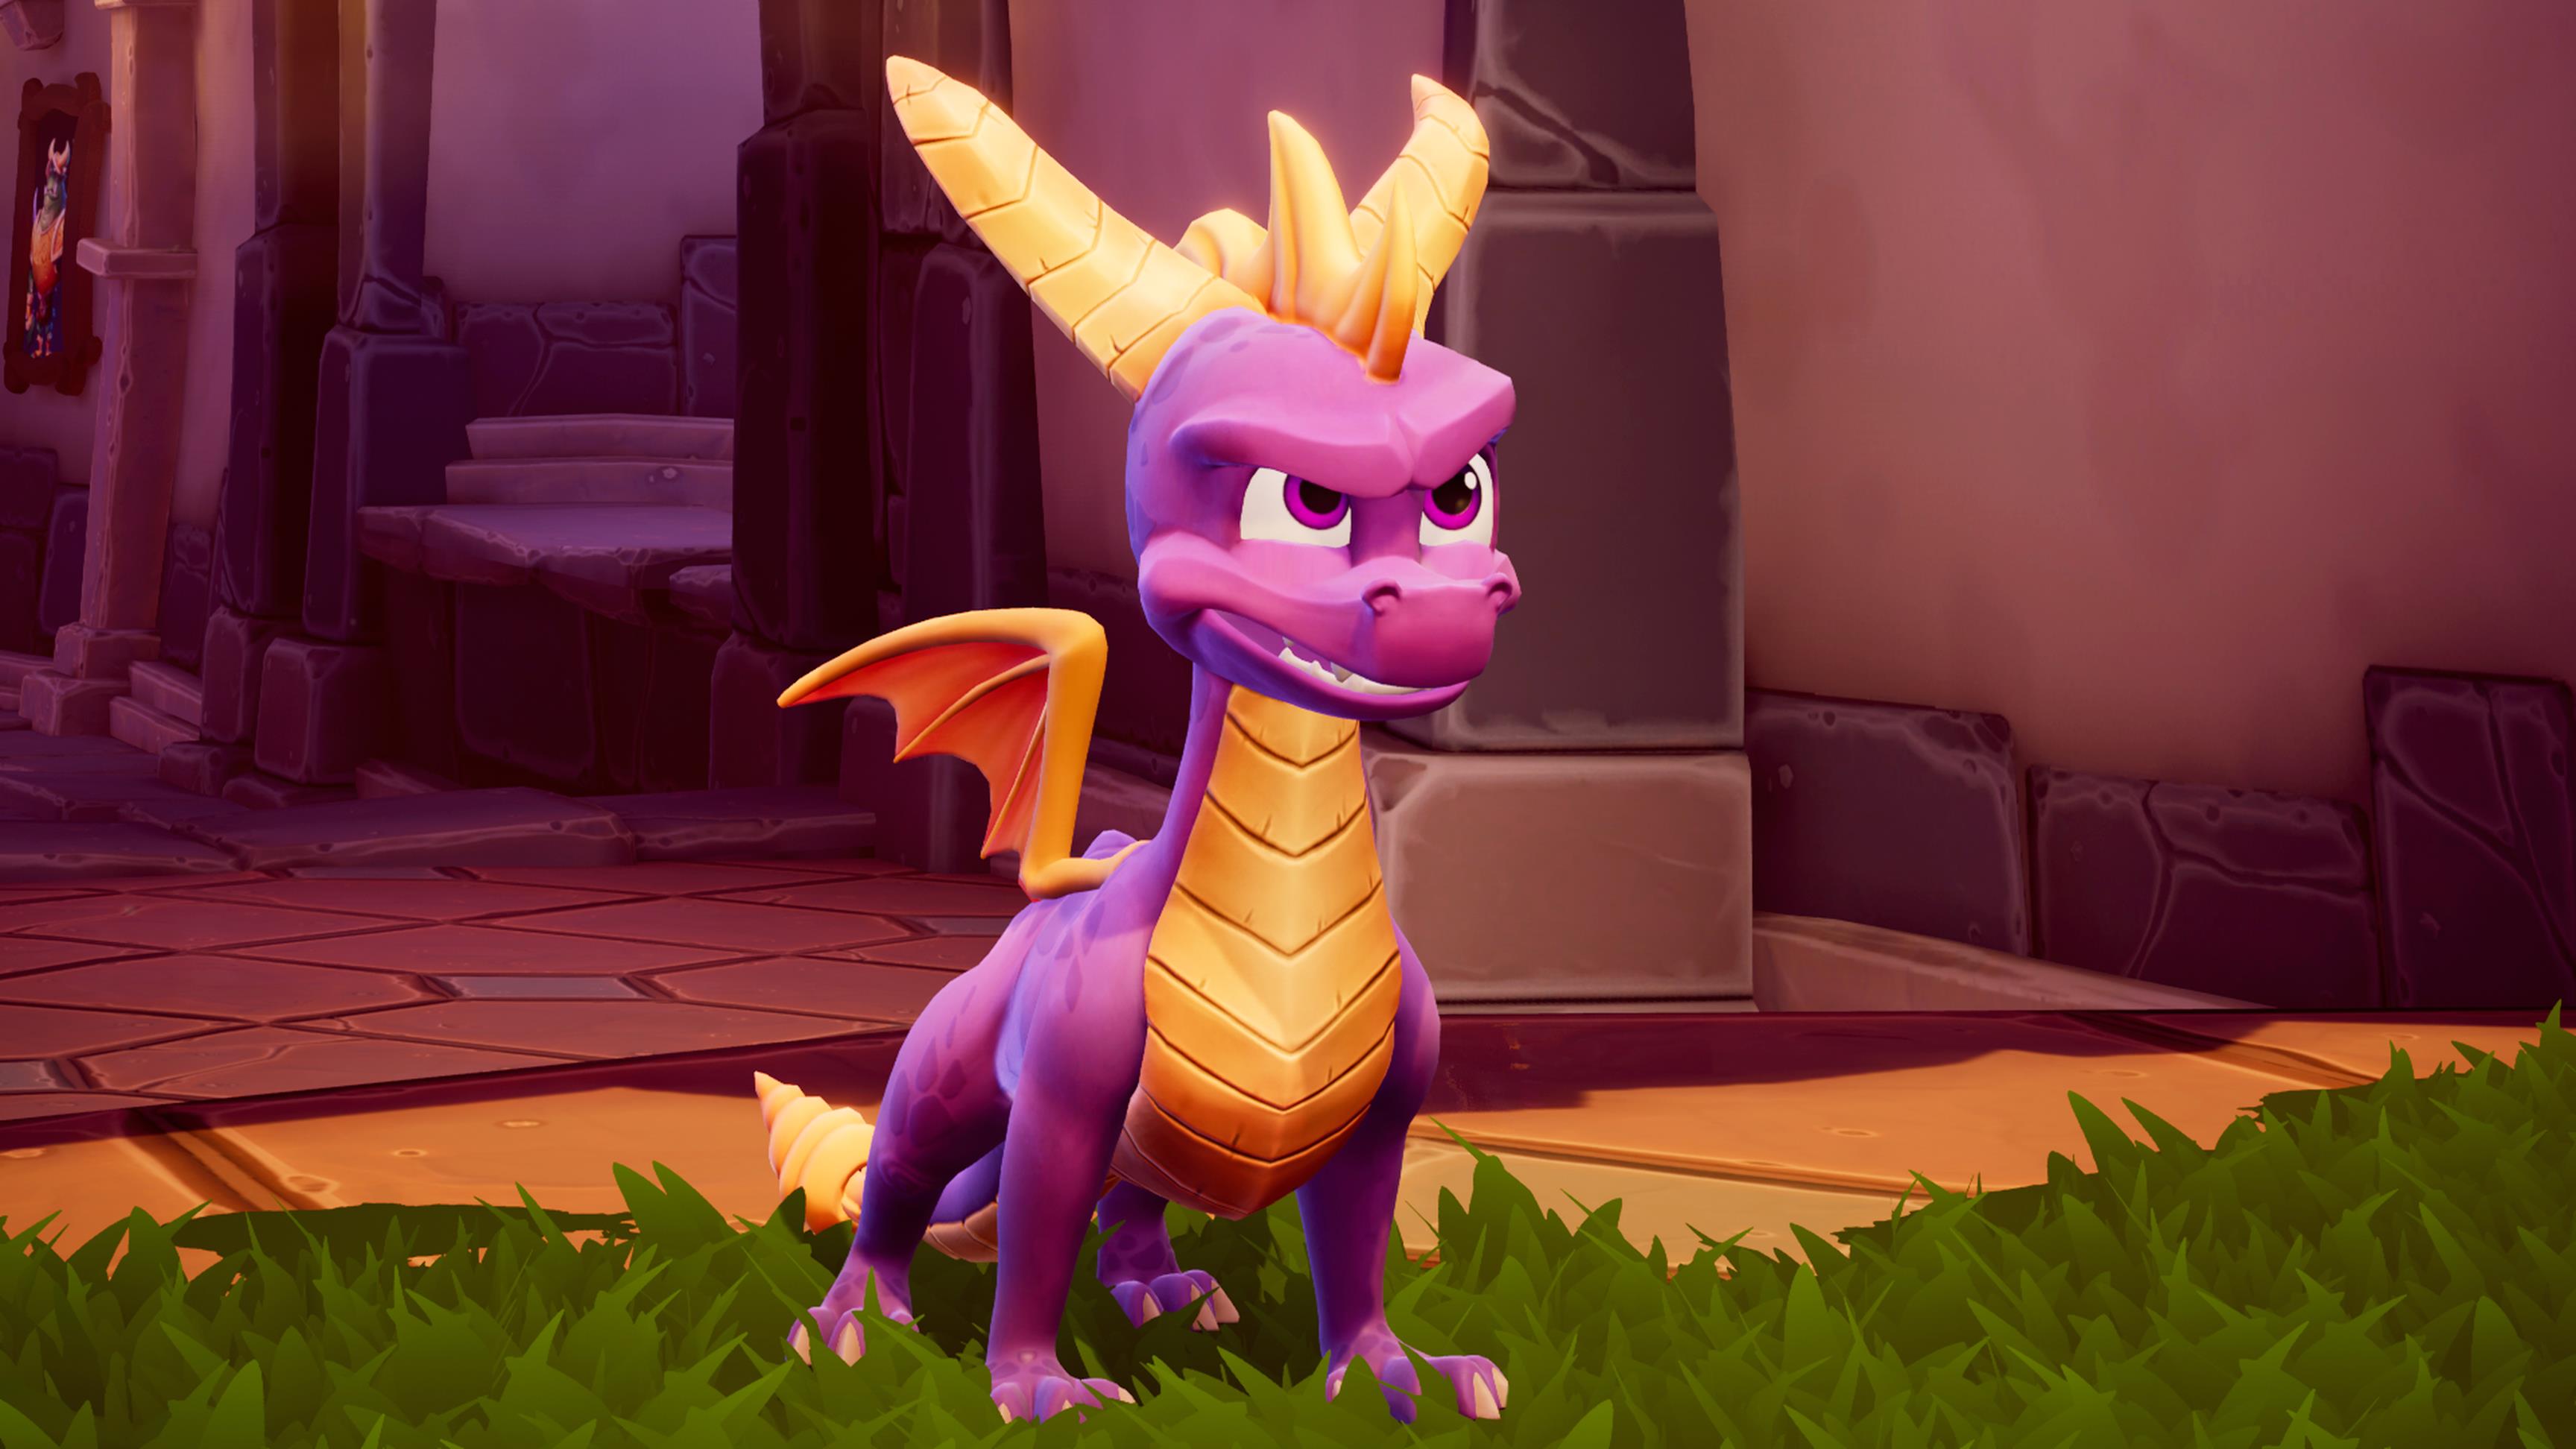 Image for Spyro Reignited Trilogy's lack of subtitles frustrates players, Activision's response makes it worse